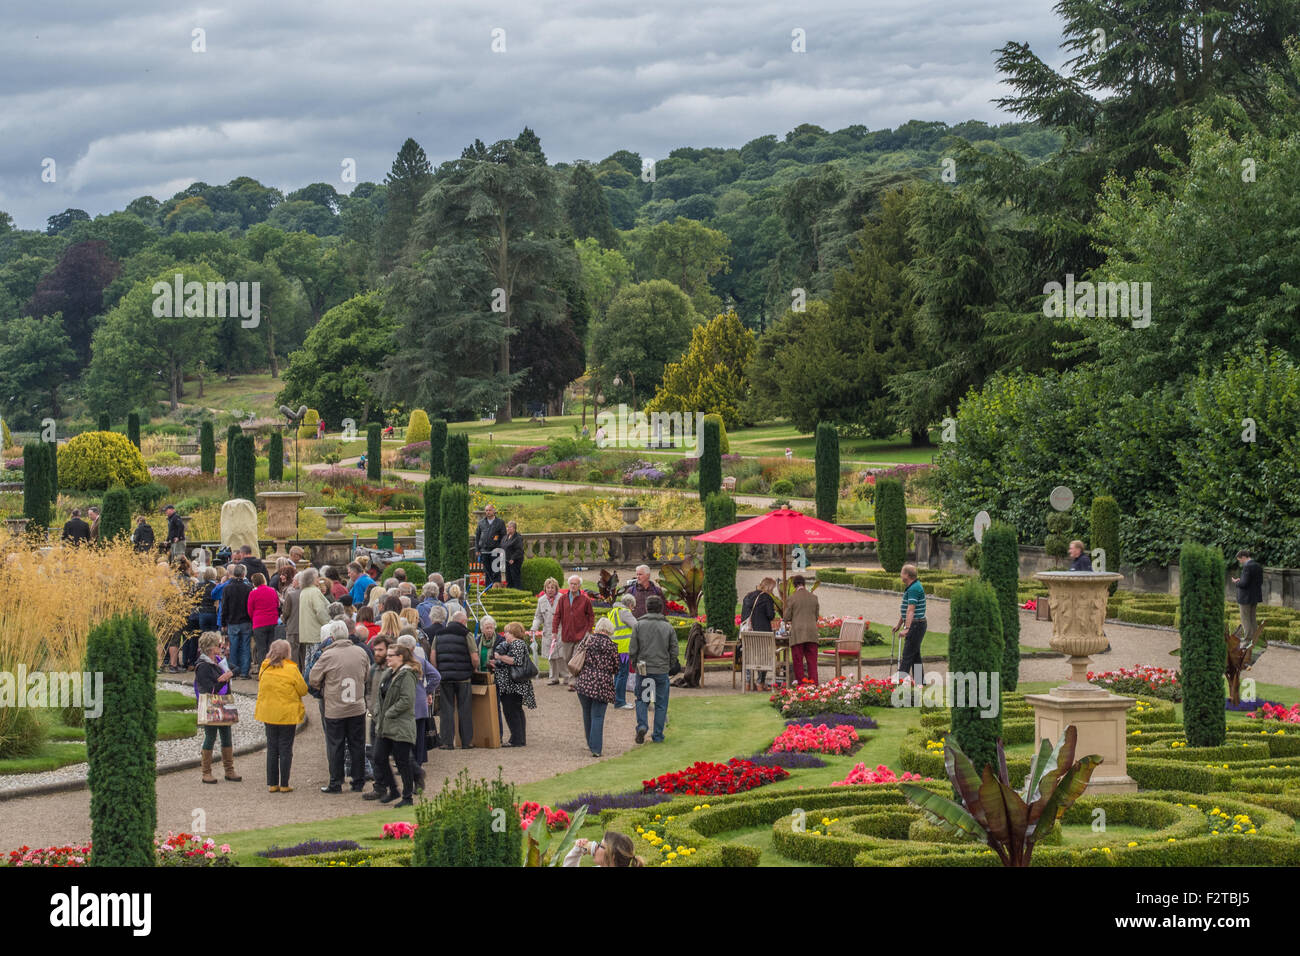 The BBC's 'Antiques Roadshow' at Trentham Gardens, Stoke on Trent, Staffordshire, England. Stock Photo